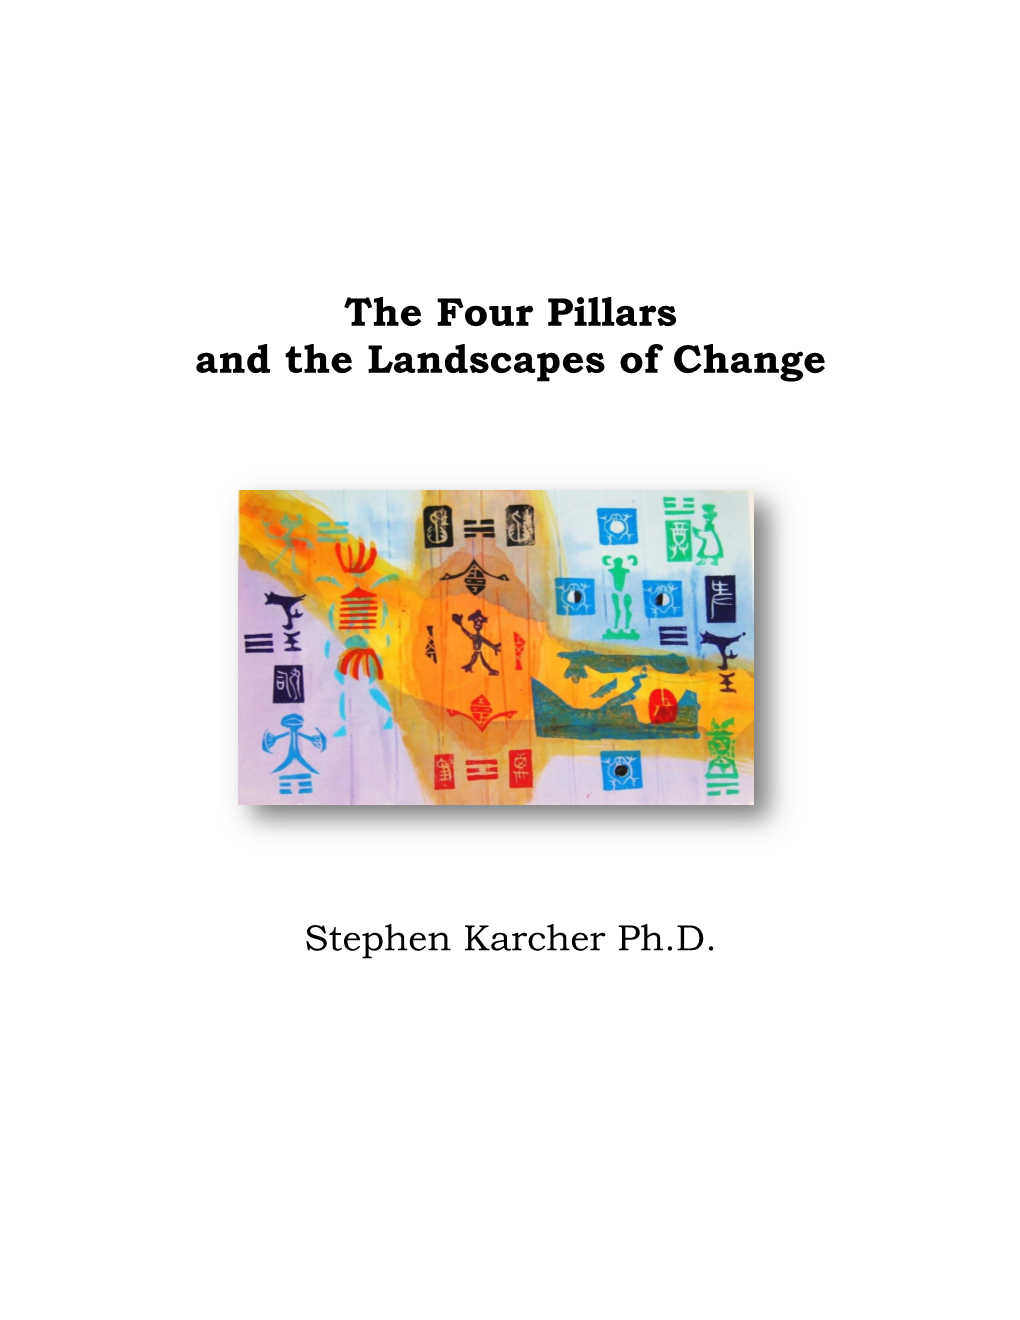 The Four Pillars and the Landscapes of Change